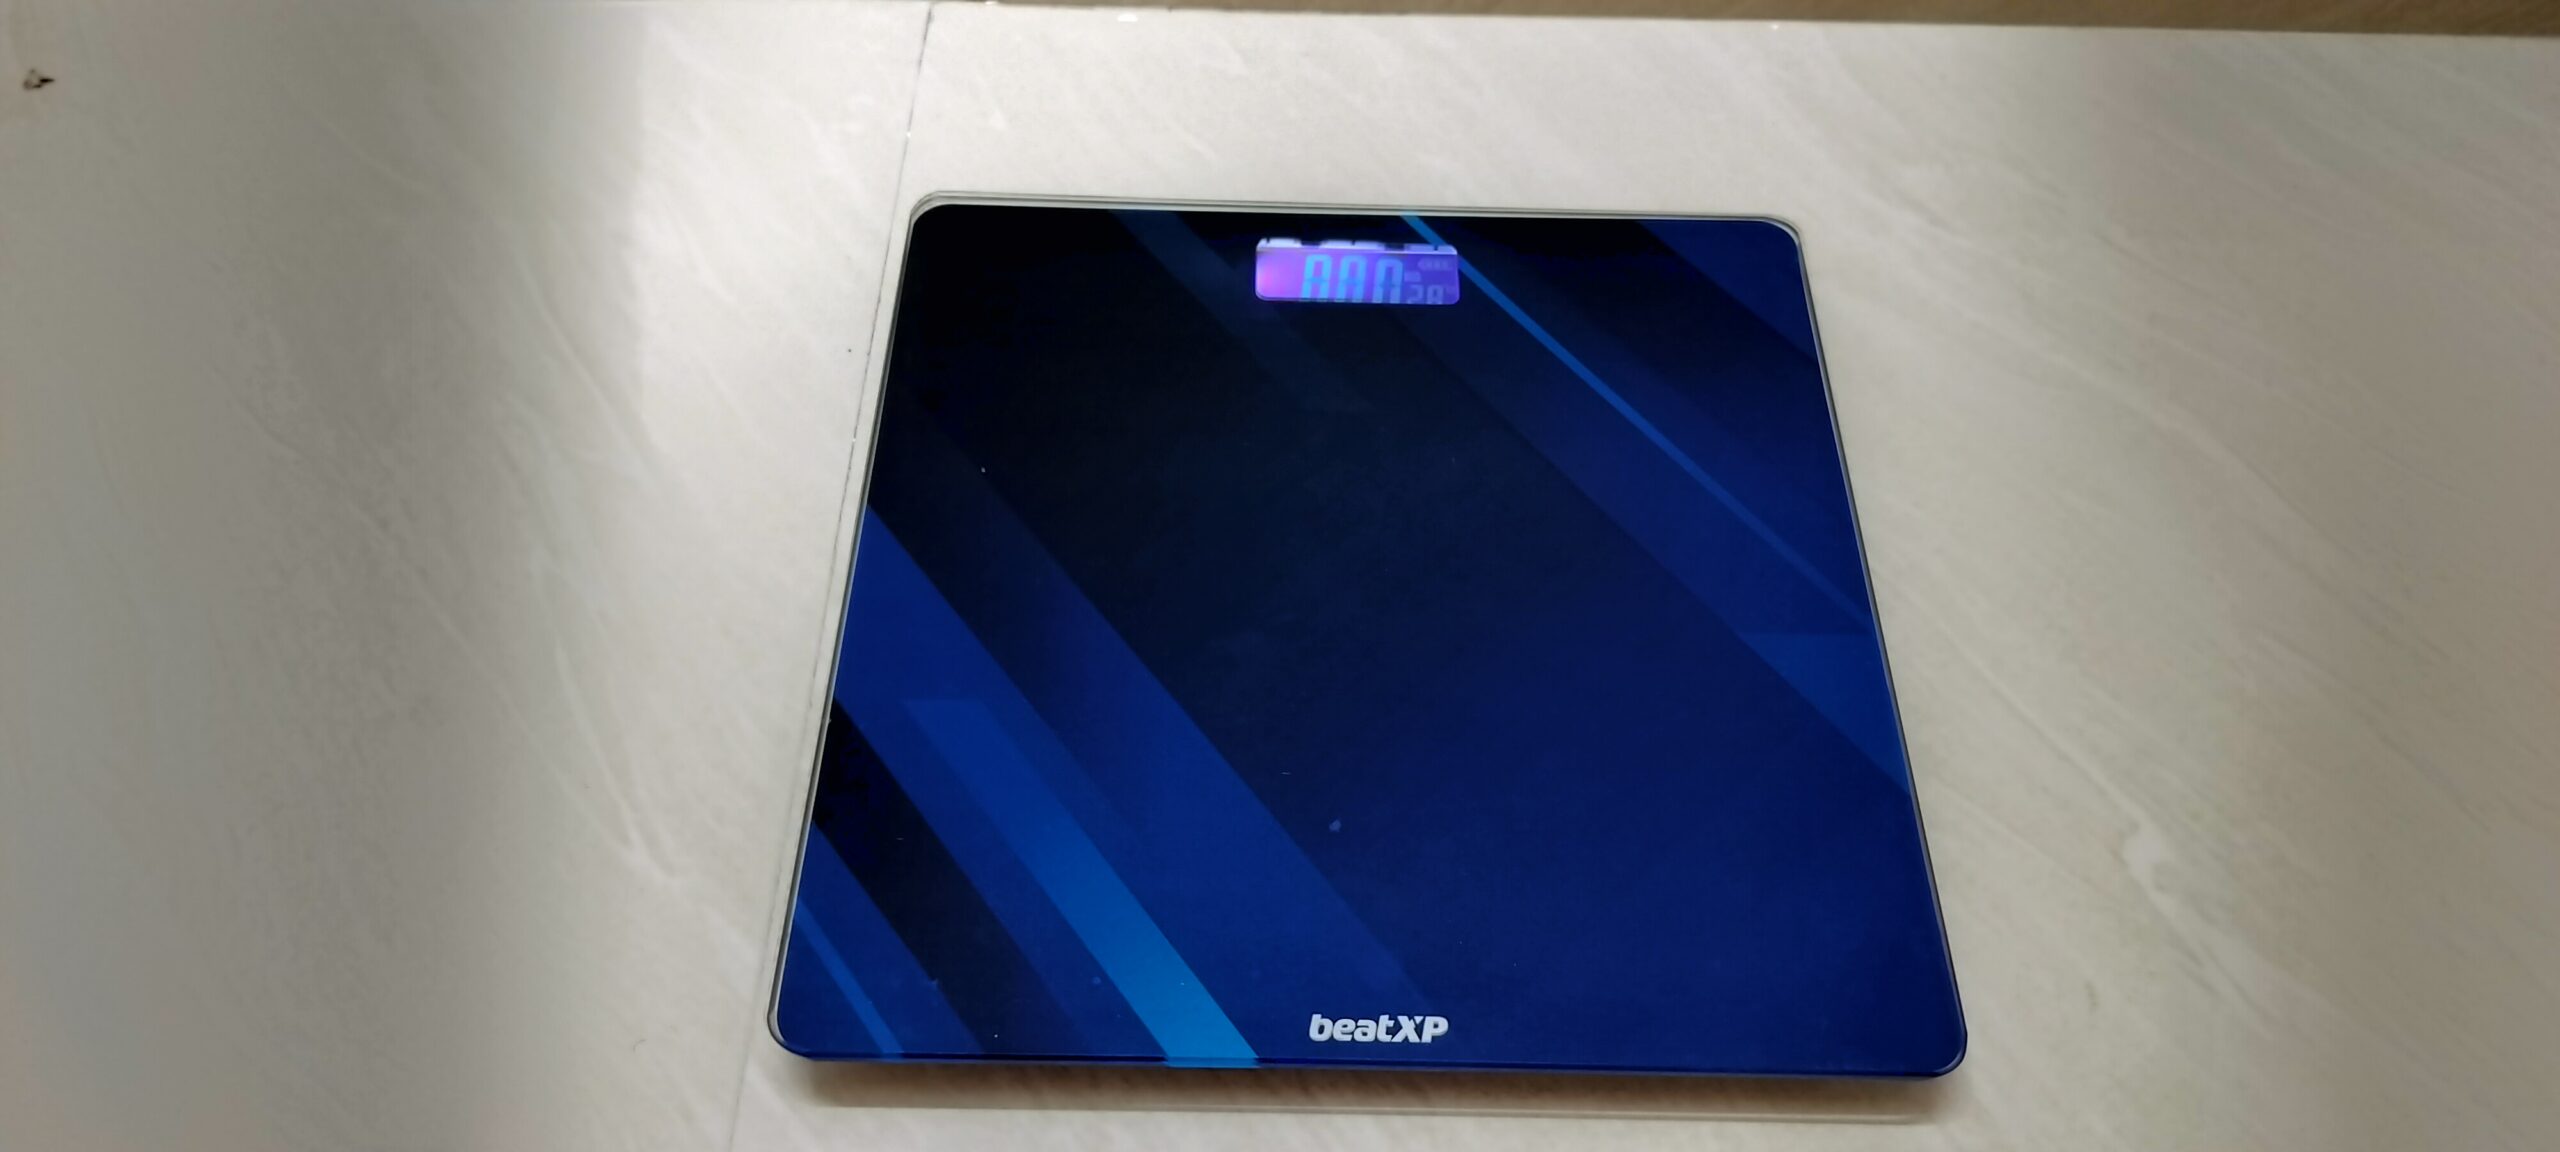 beatXP Optifit Glaze Digital Weighing Scale Review